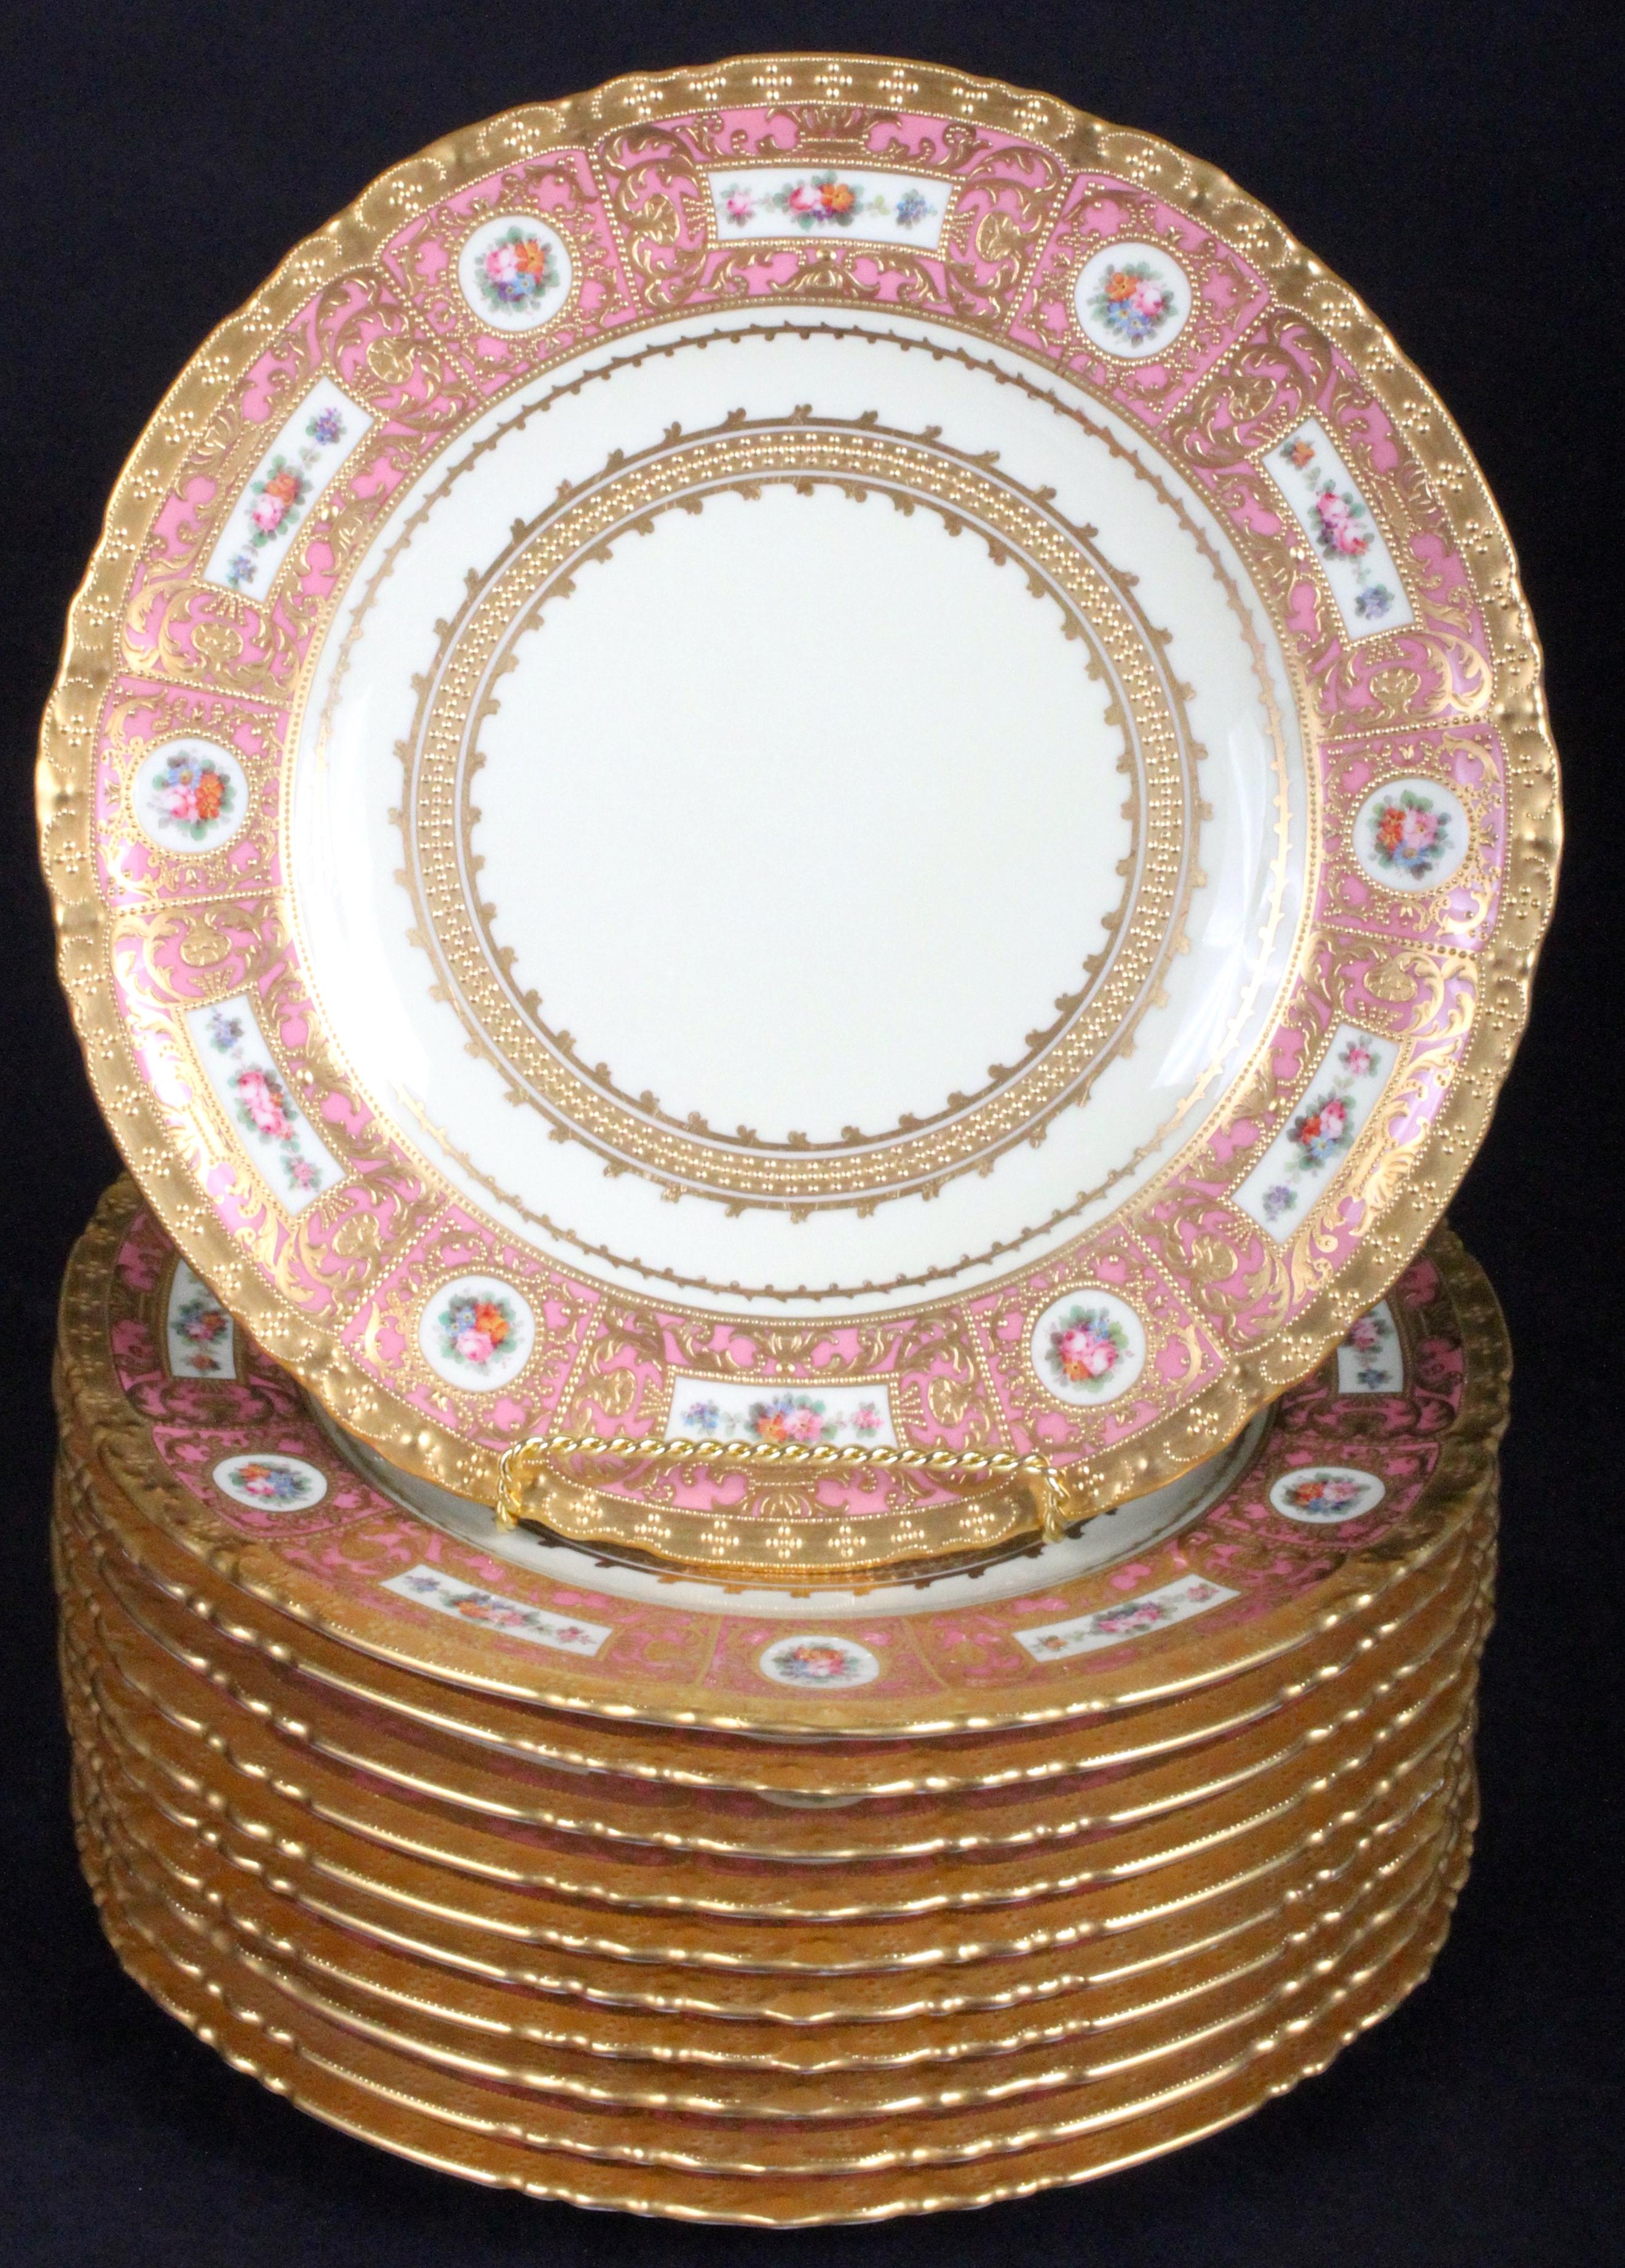 Neoclassical 15 Derby for Tiffany Hand Painted and Gilded Pink Service Plates For Sale